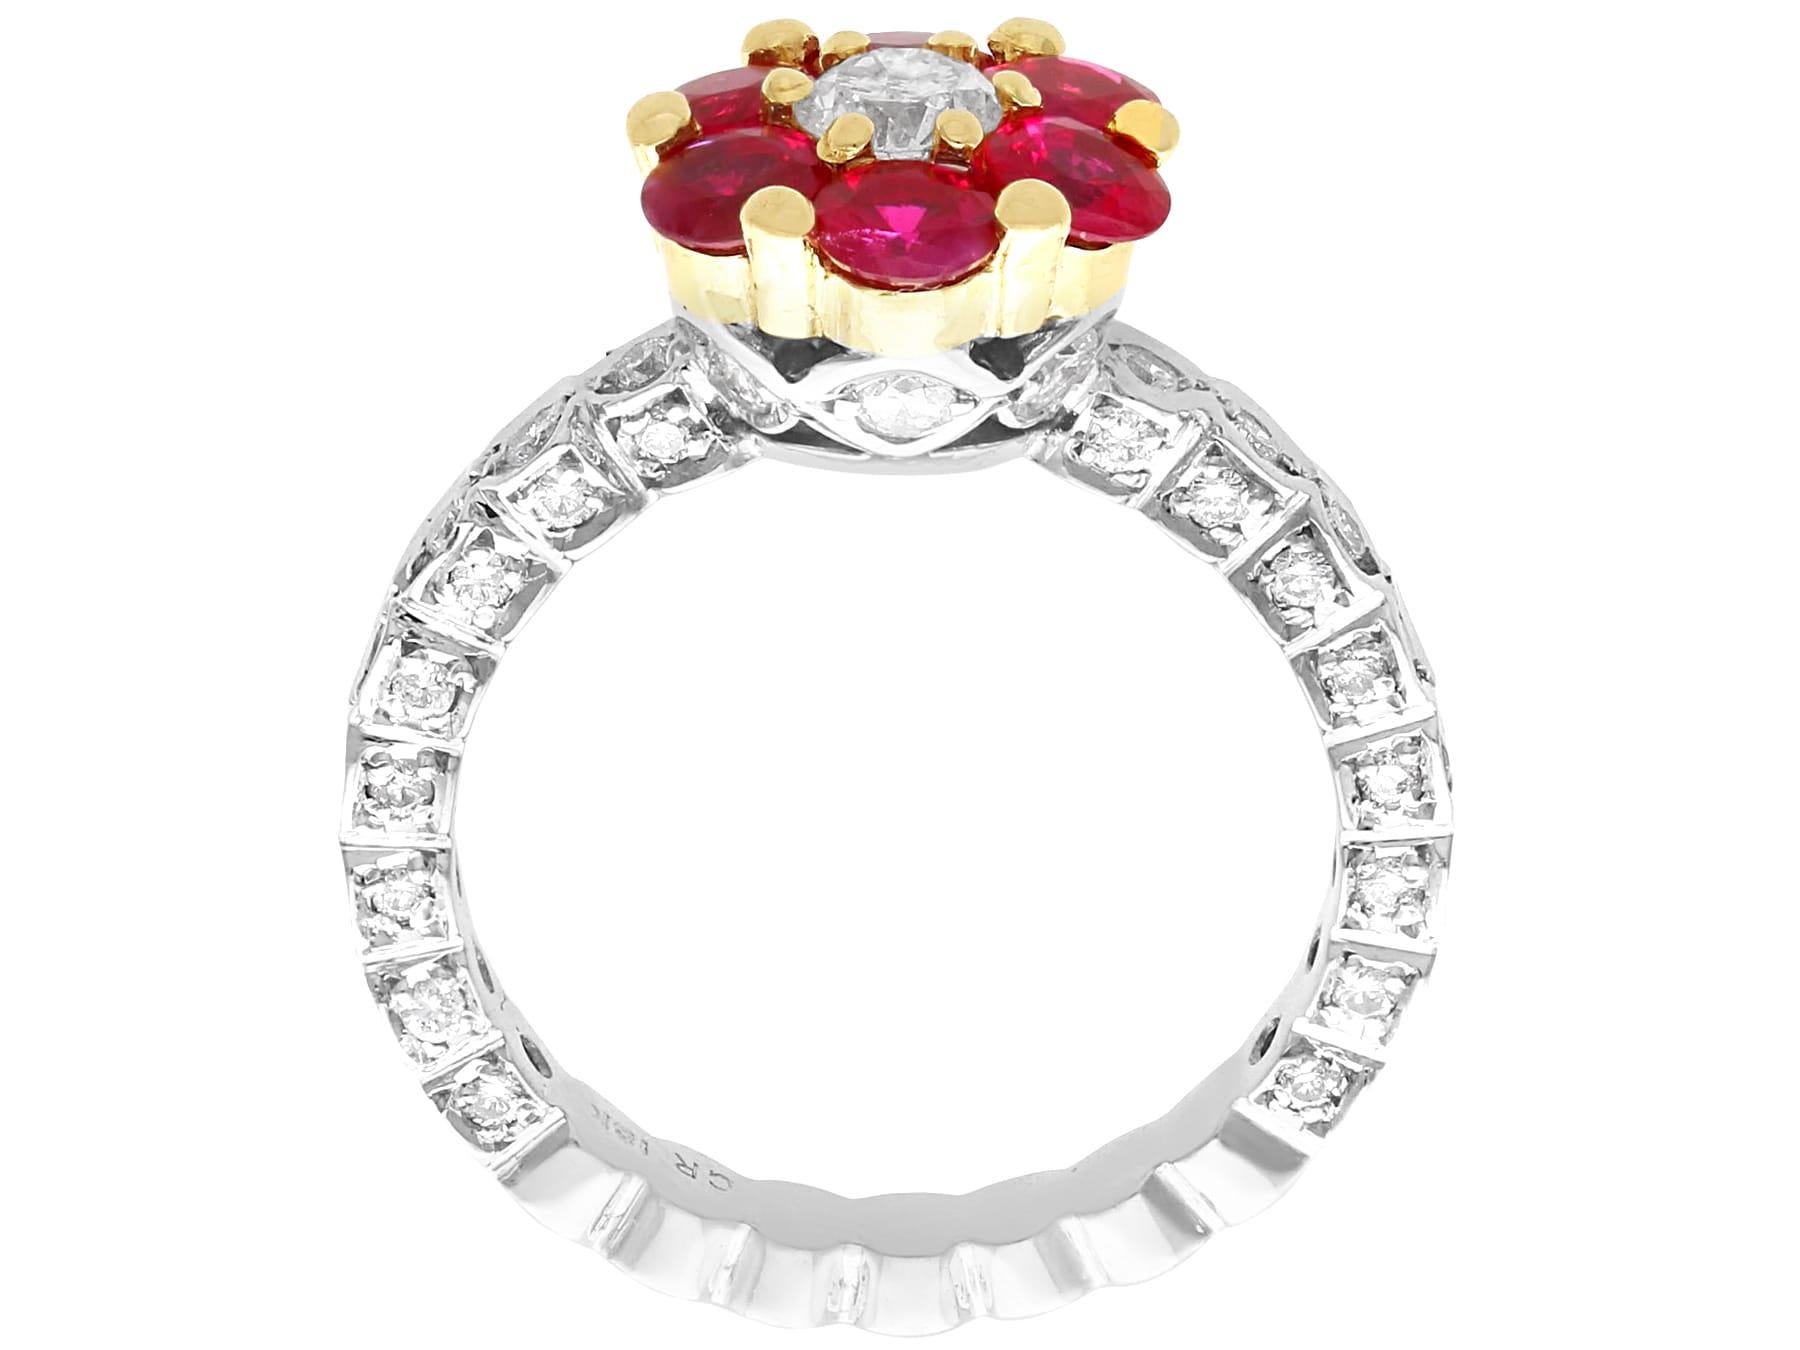 Vintage 1.46Ct Ruby and 1.88Ct Diamond 18k White Gold Cluster Ring Circa 1990 For Sale 2